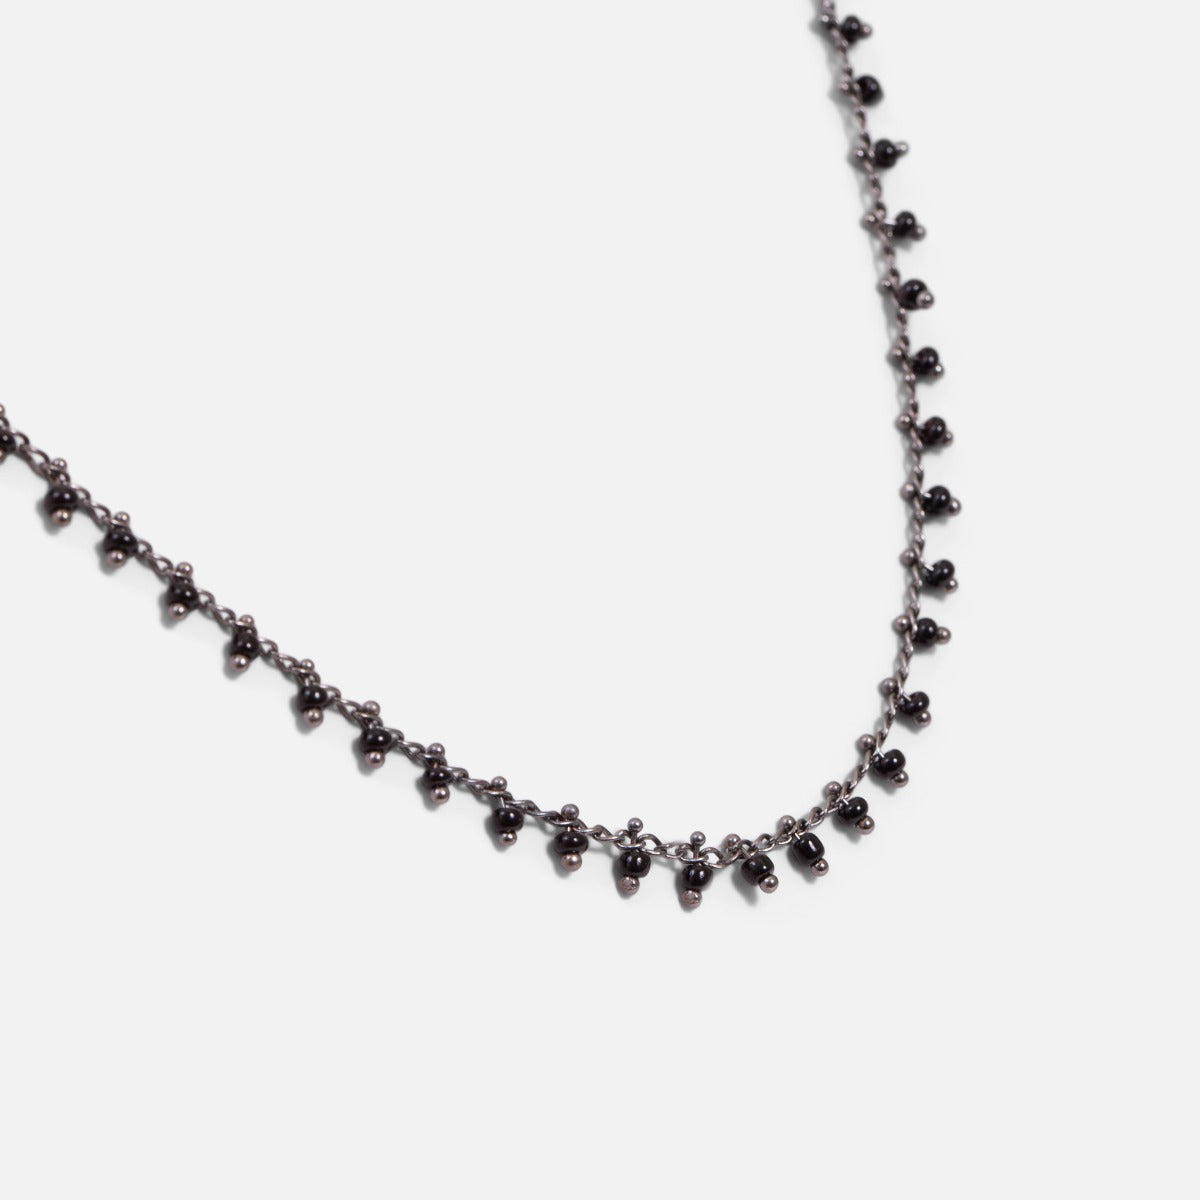 Long silvered and black necklace with beads effect